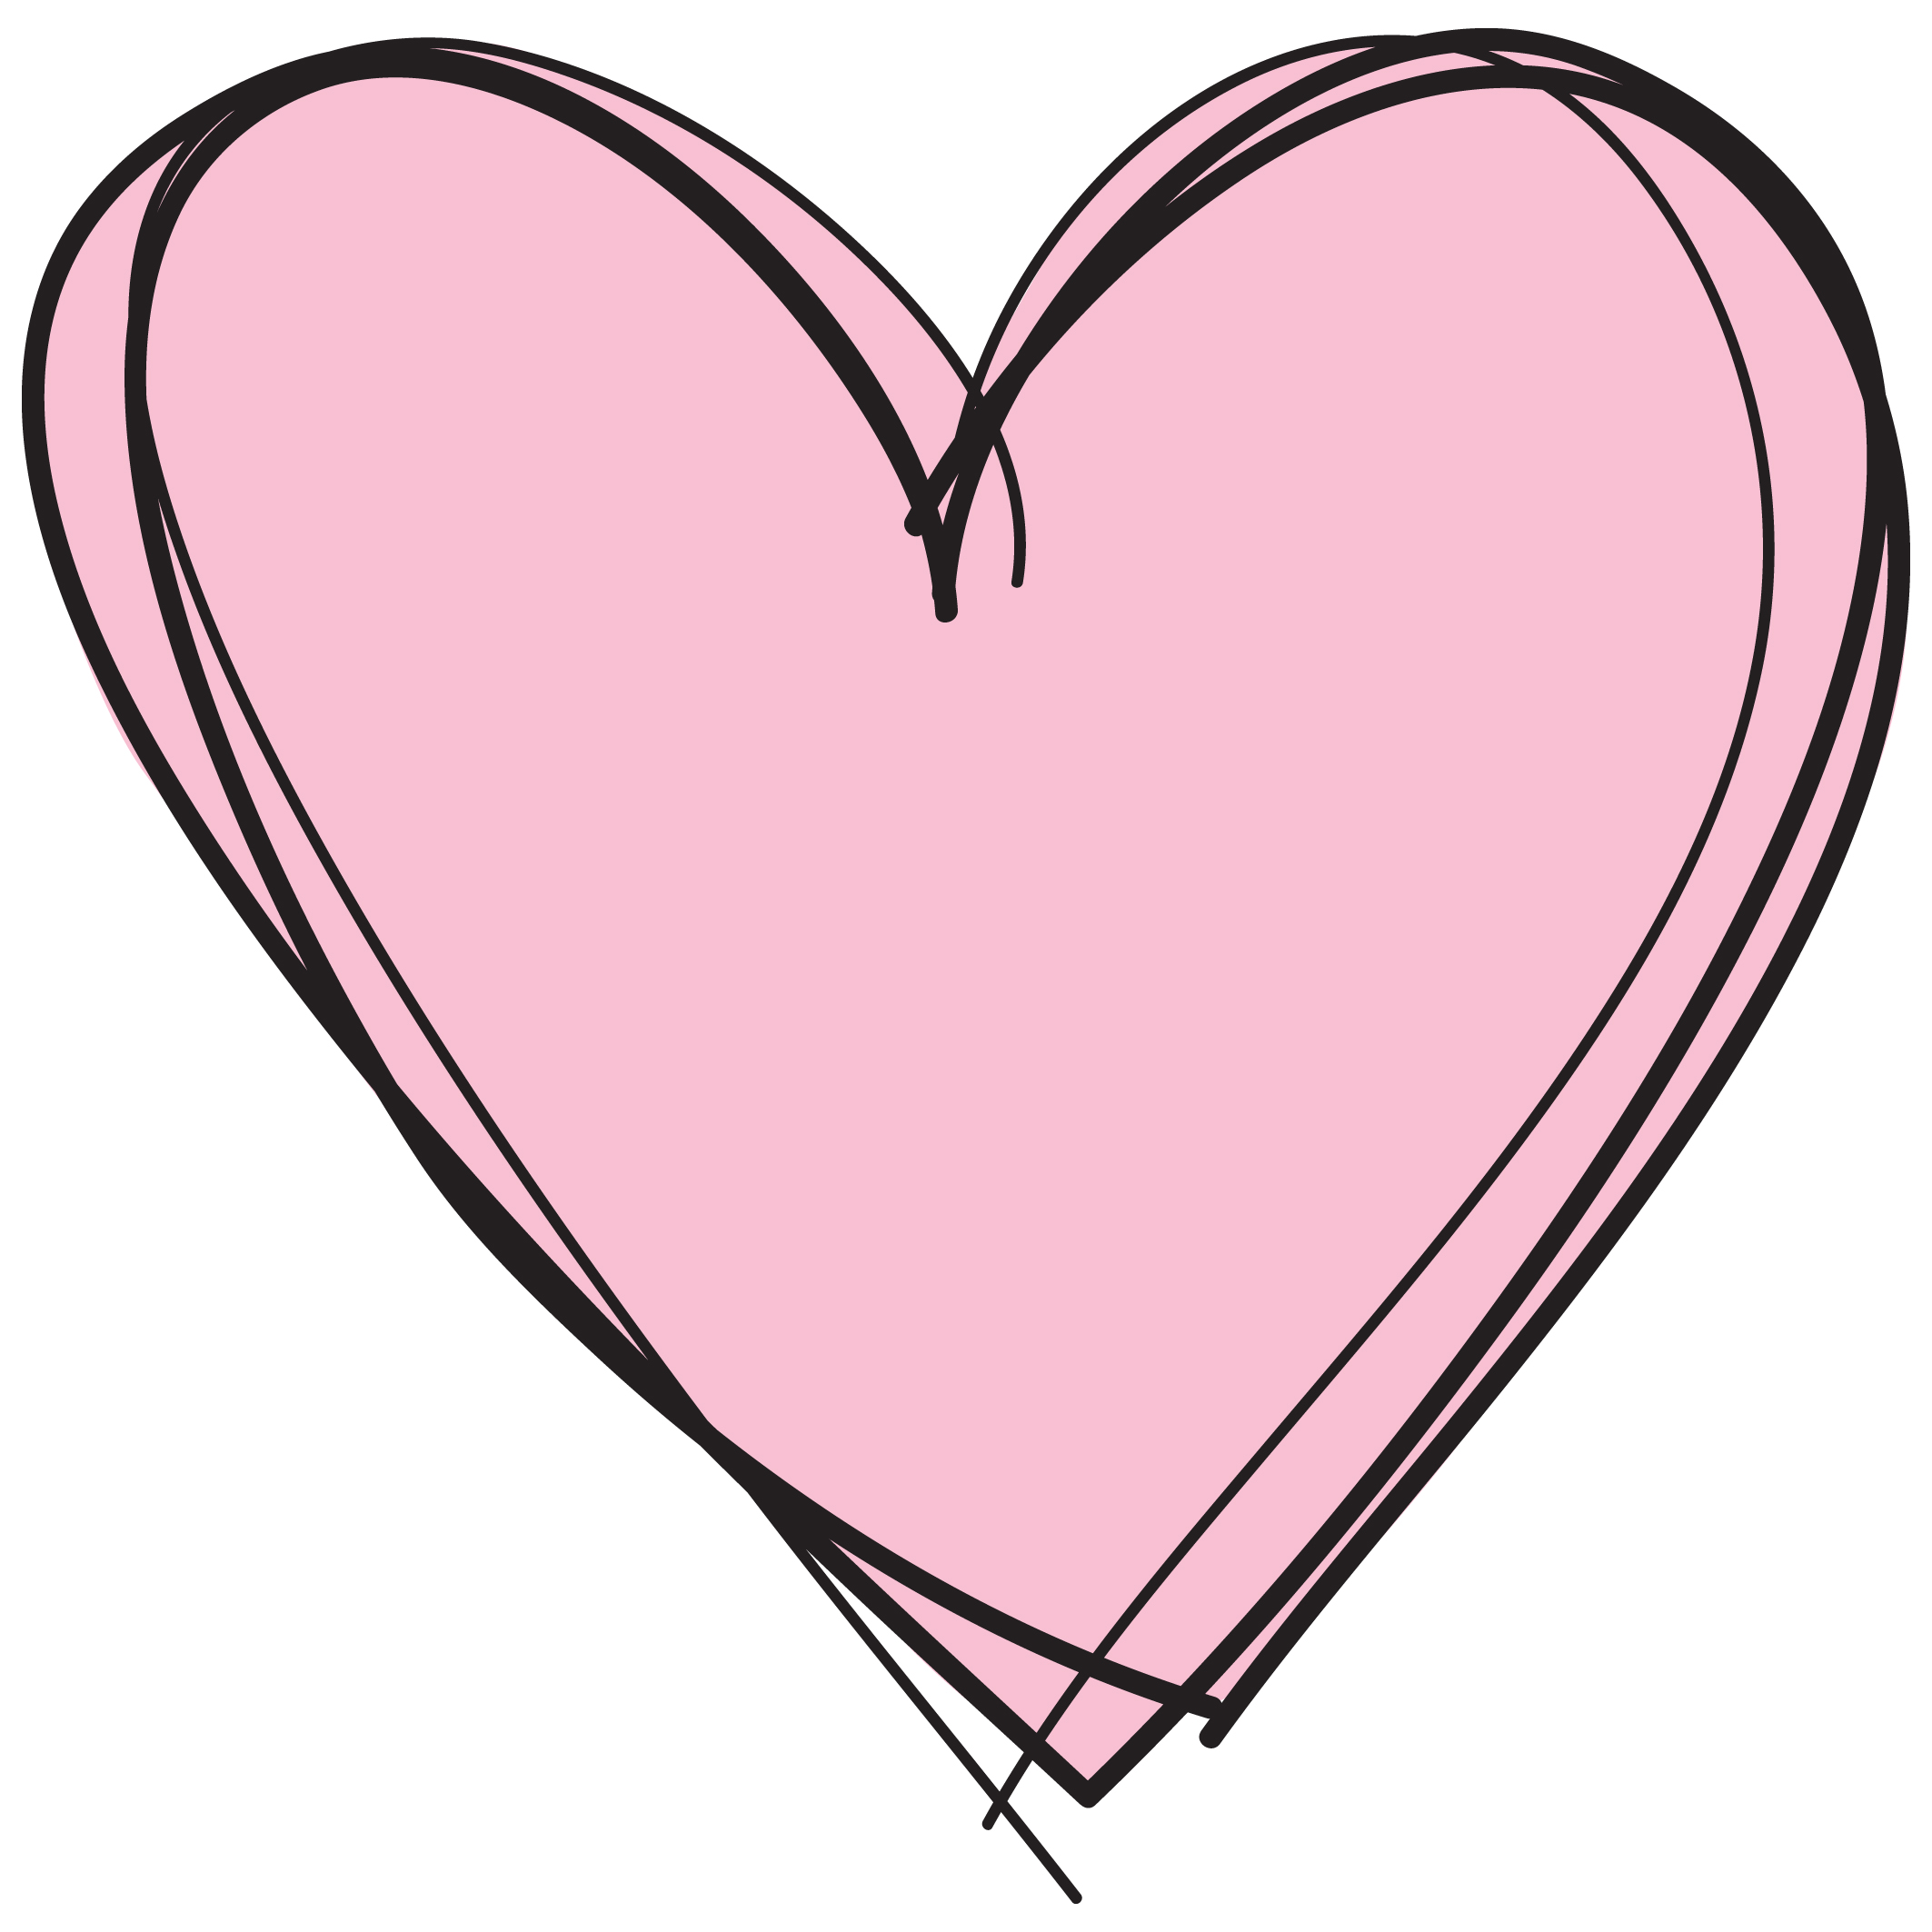 Pink Heart Outline Clipart | Clipart Panda - Free Clipart Images